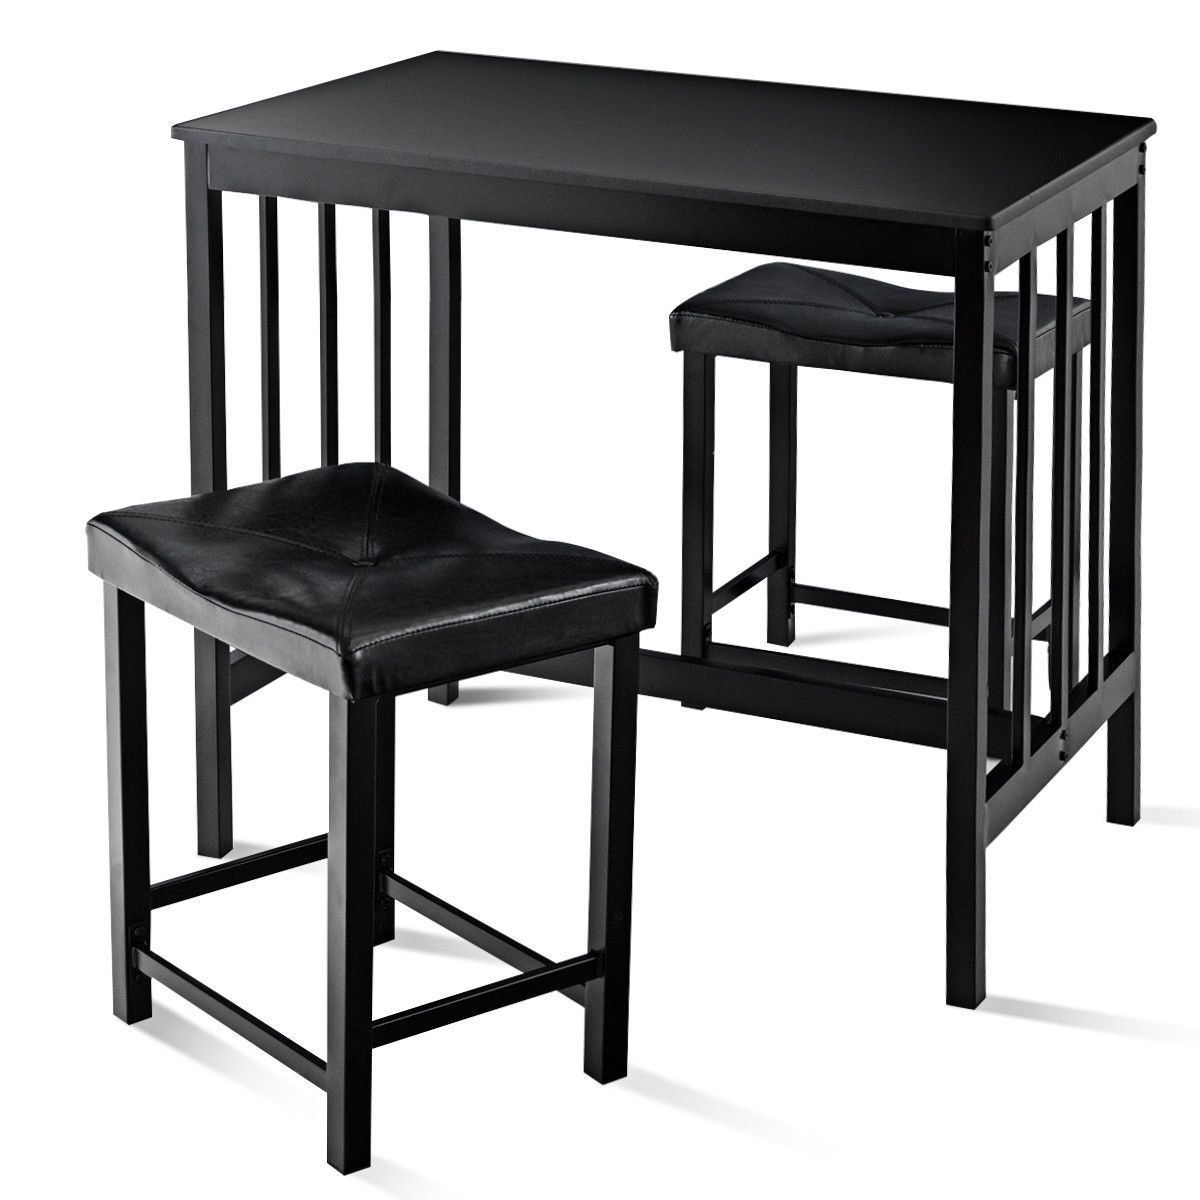 Miskell 3 Piece Dining Set Pertaining To Fashionable Miskell 3 Piece Dining Sets (View 1 of 20)